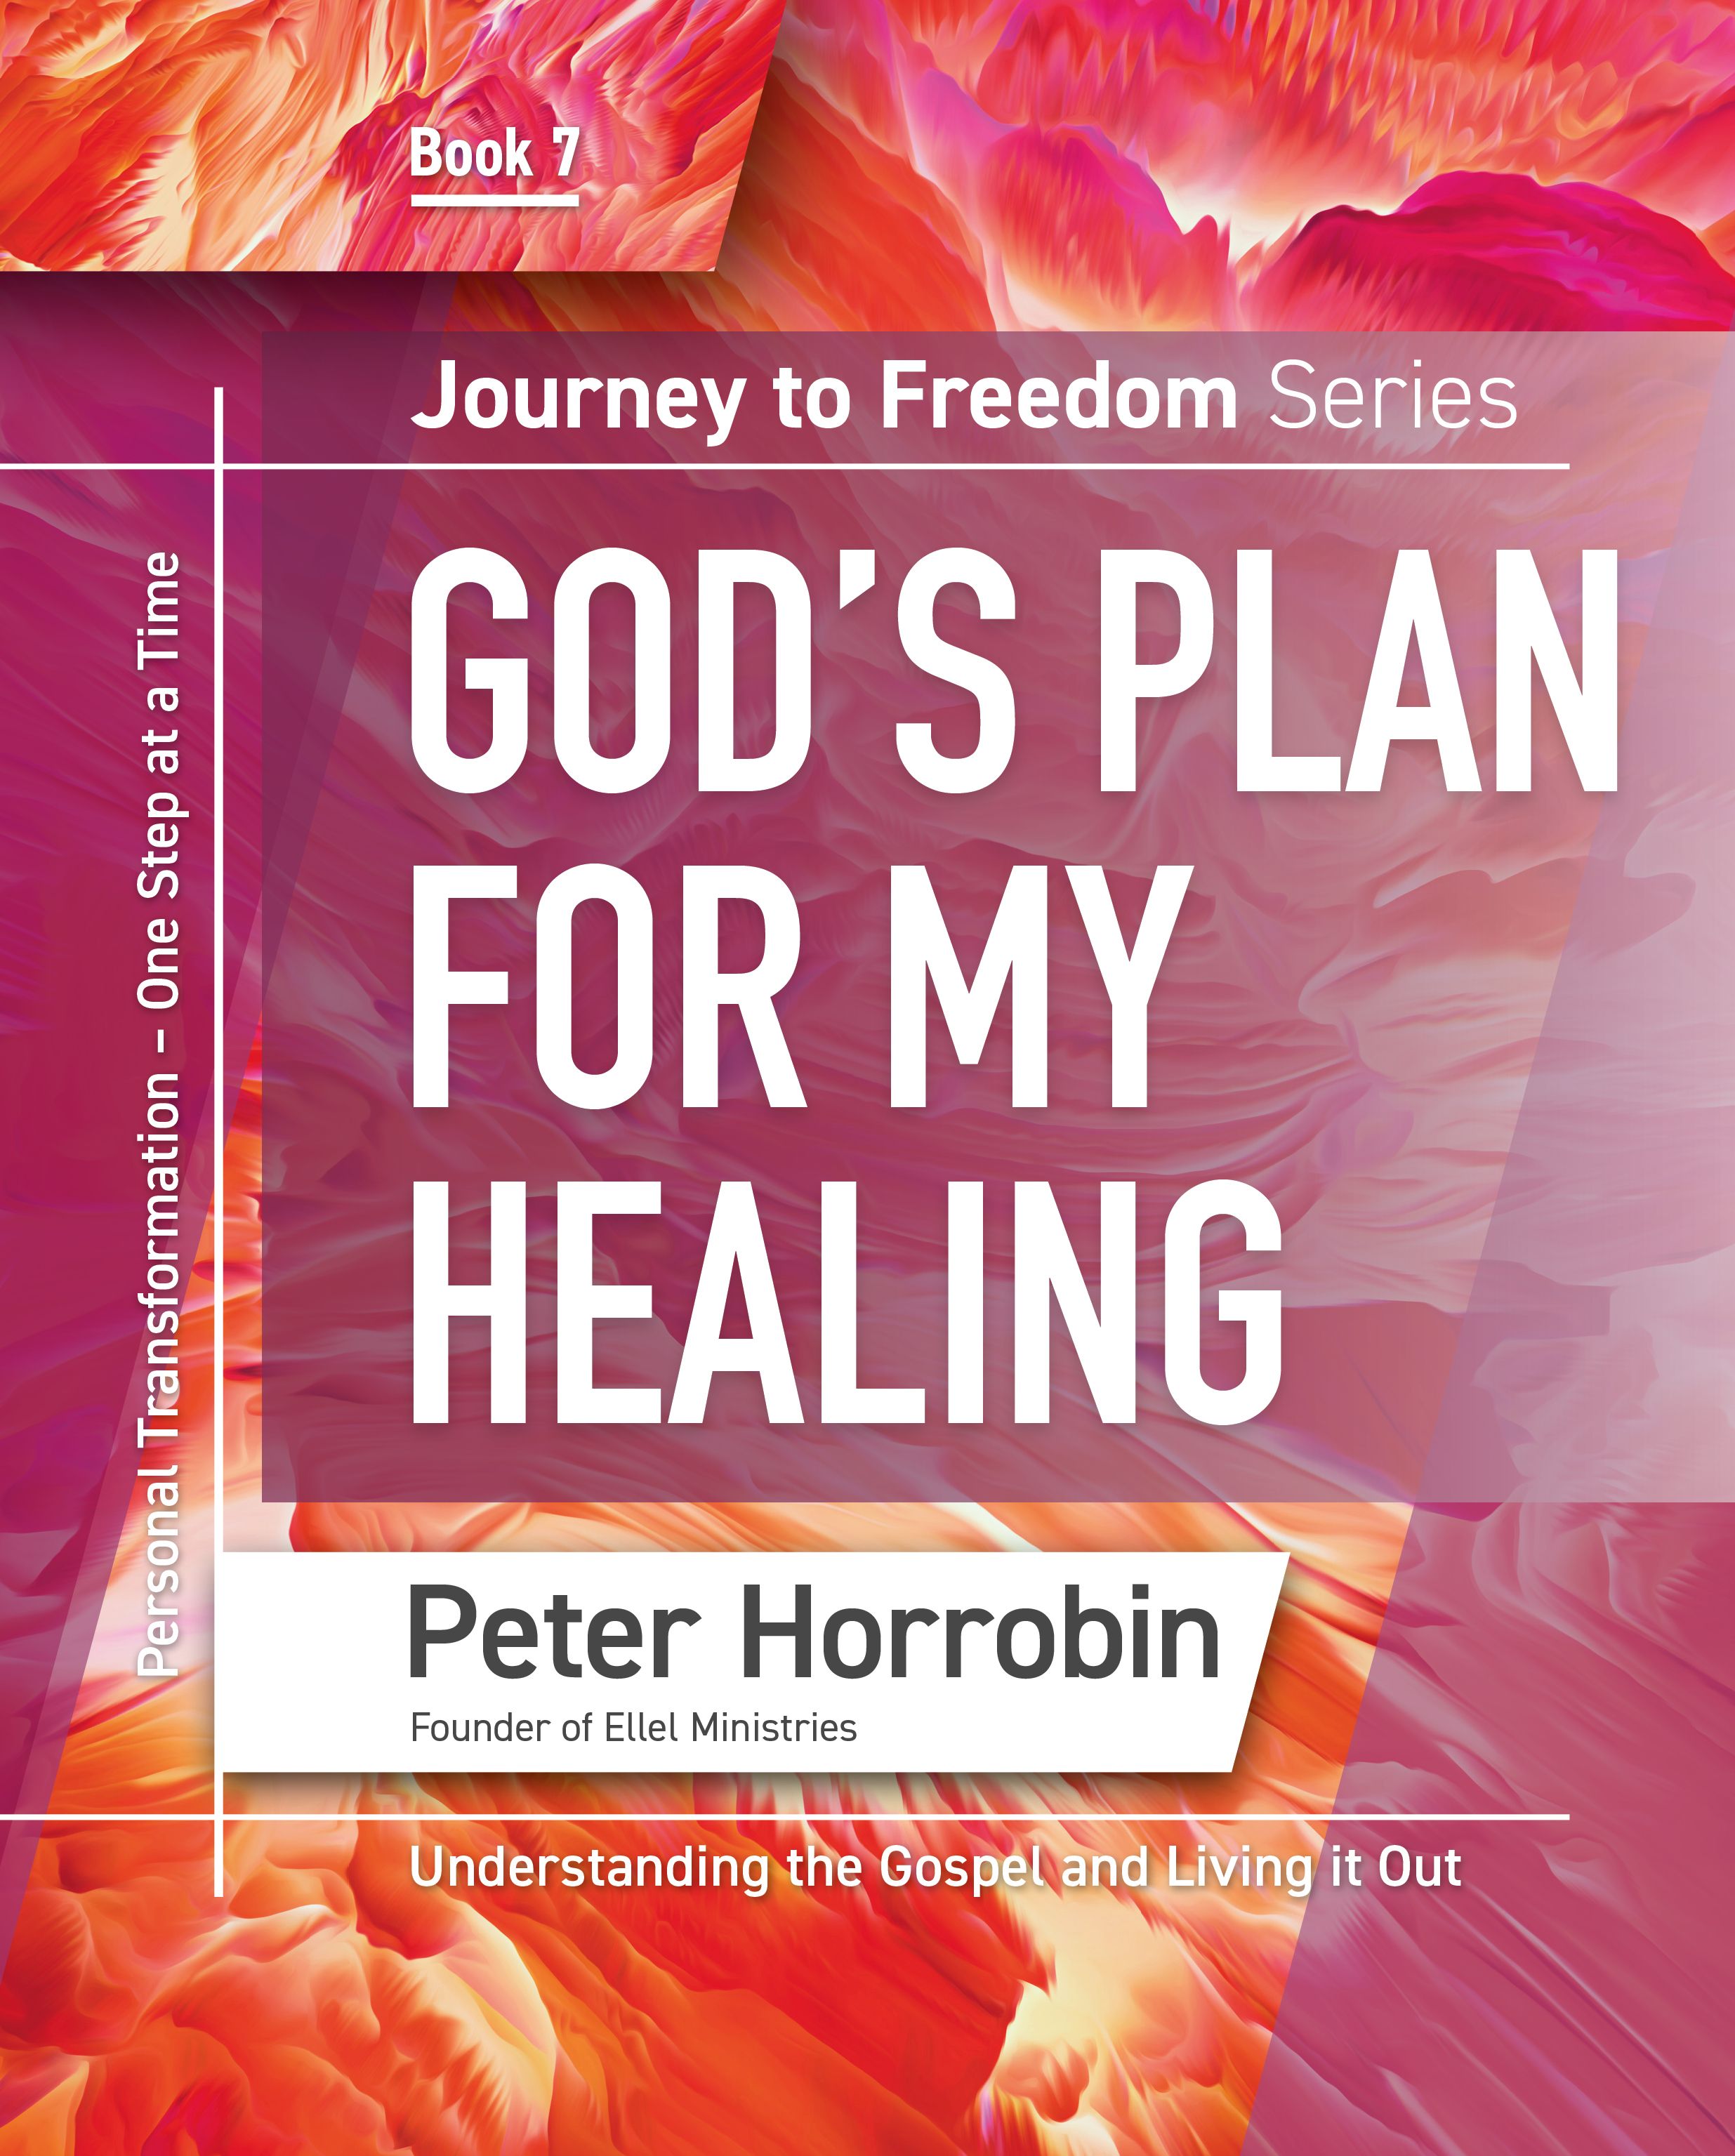 Journey to Freedom Book 7 - God’s Plan for My Healing